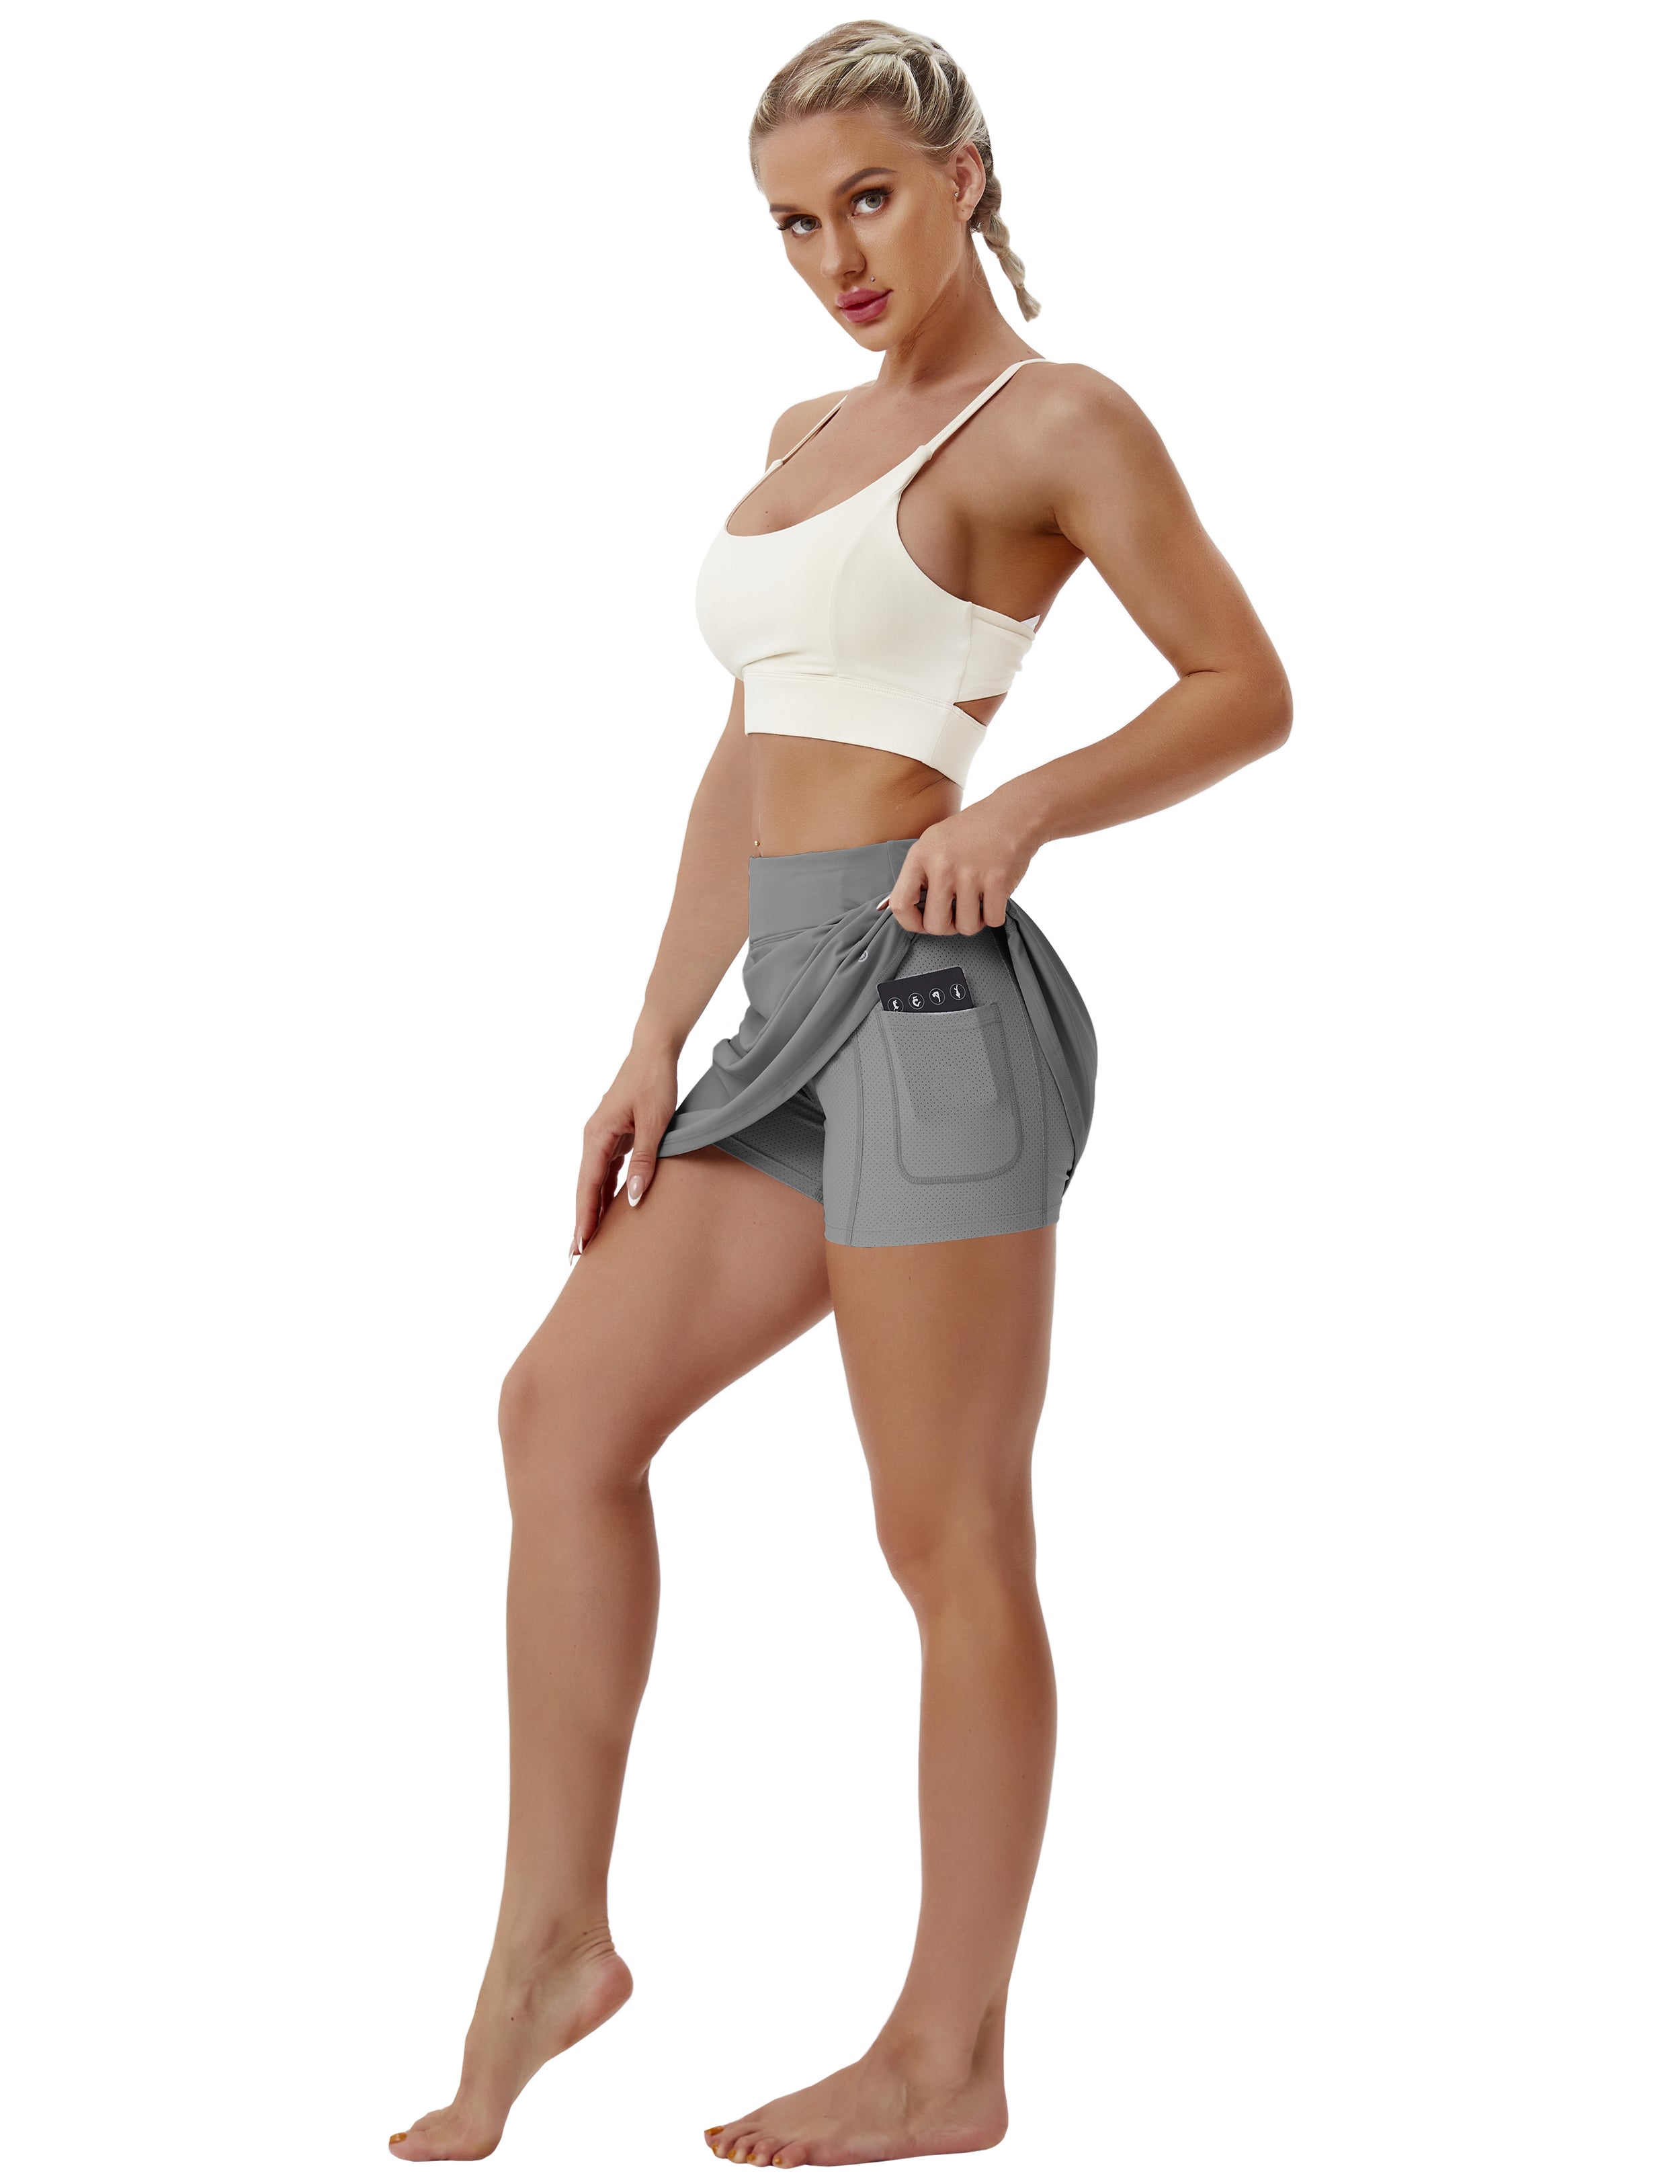 Athletic Tennis Golf Skort with Pockets Shorts gray 80%Nylon/20%Spandex UPF 50+ sun protection Elastic closure Lightweight, Wrinkle Moisture wicking Quick drying Secure & comfortable two layer Hidden pocket